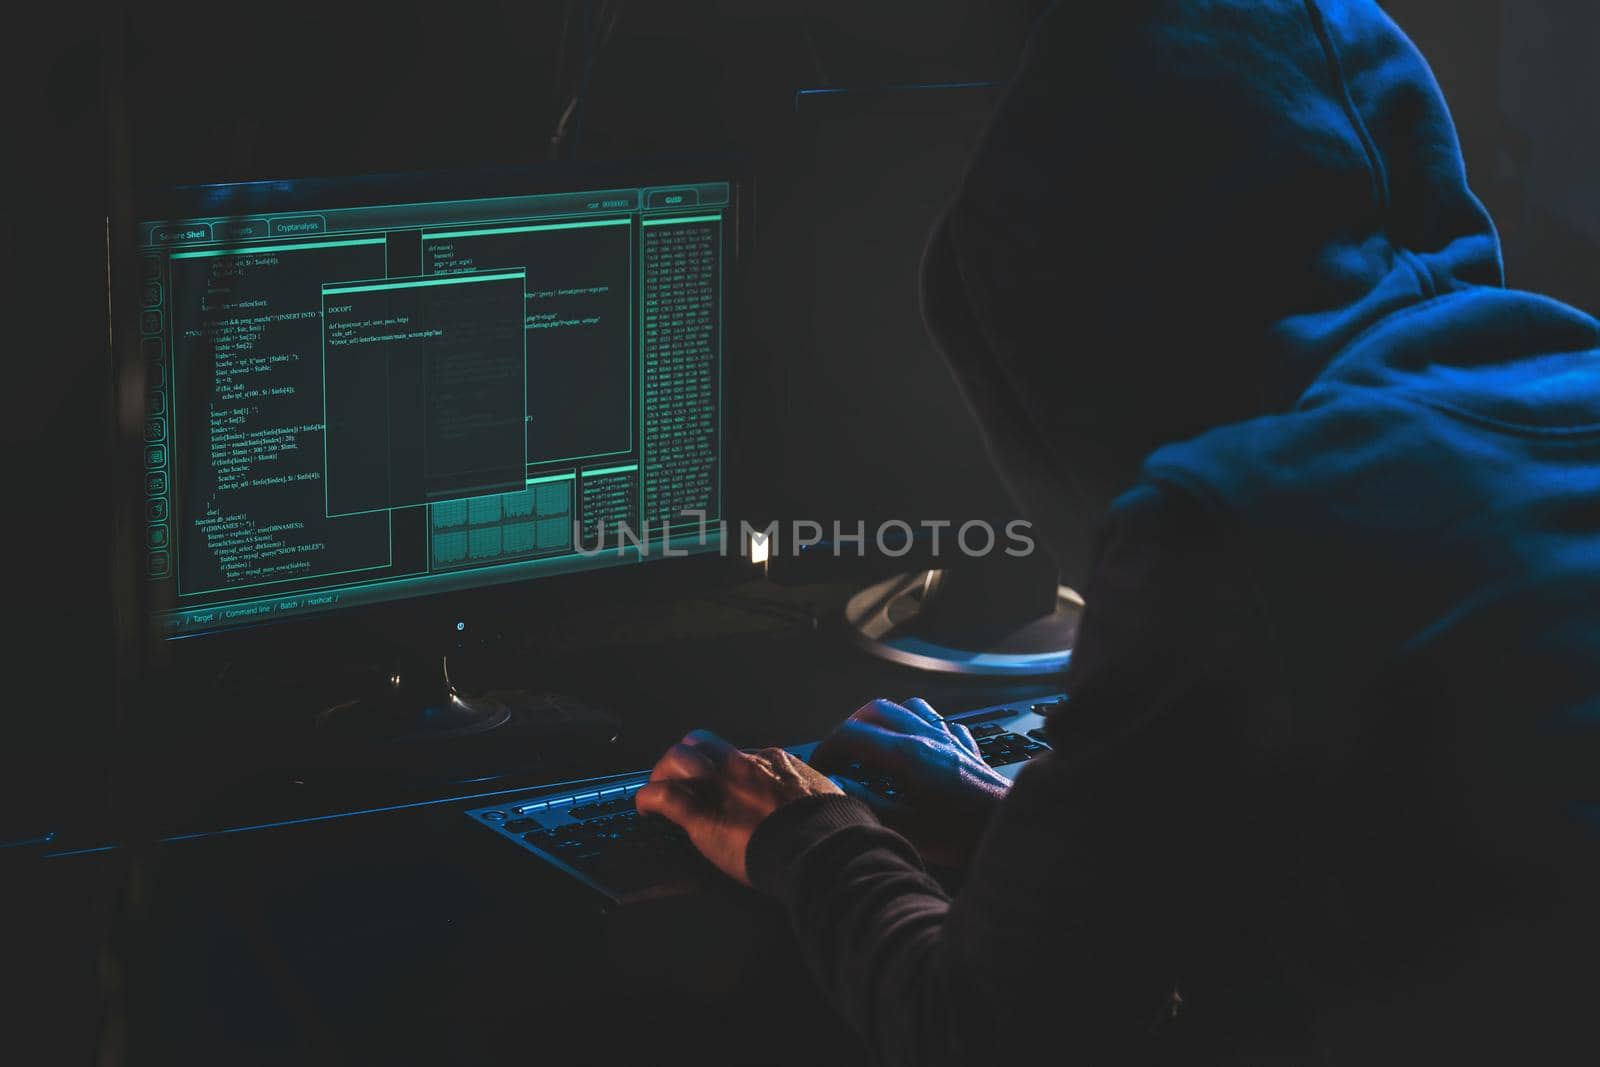 Cyber criminal hacking system at monitors, hacker hands at work. Internet crime concept. Hacker steals password attack victim computer working on code in dark. Hacking and malware concept. Cybercrime. Download image